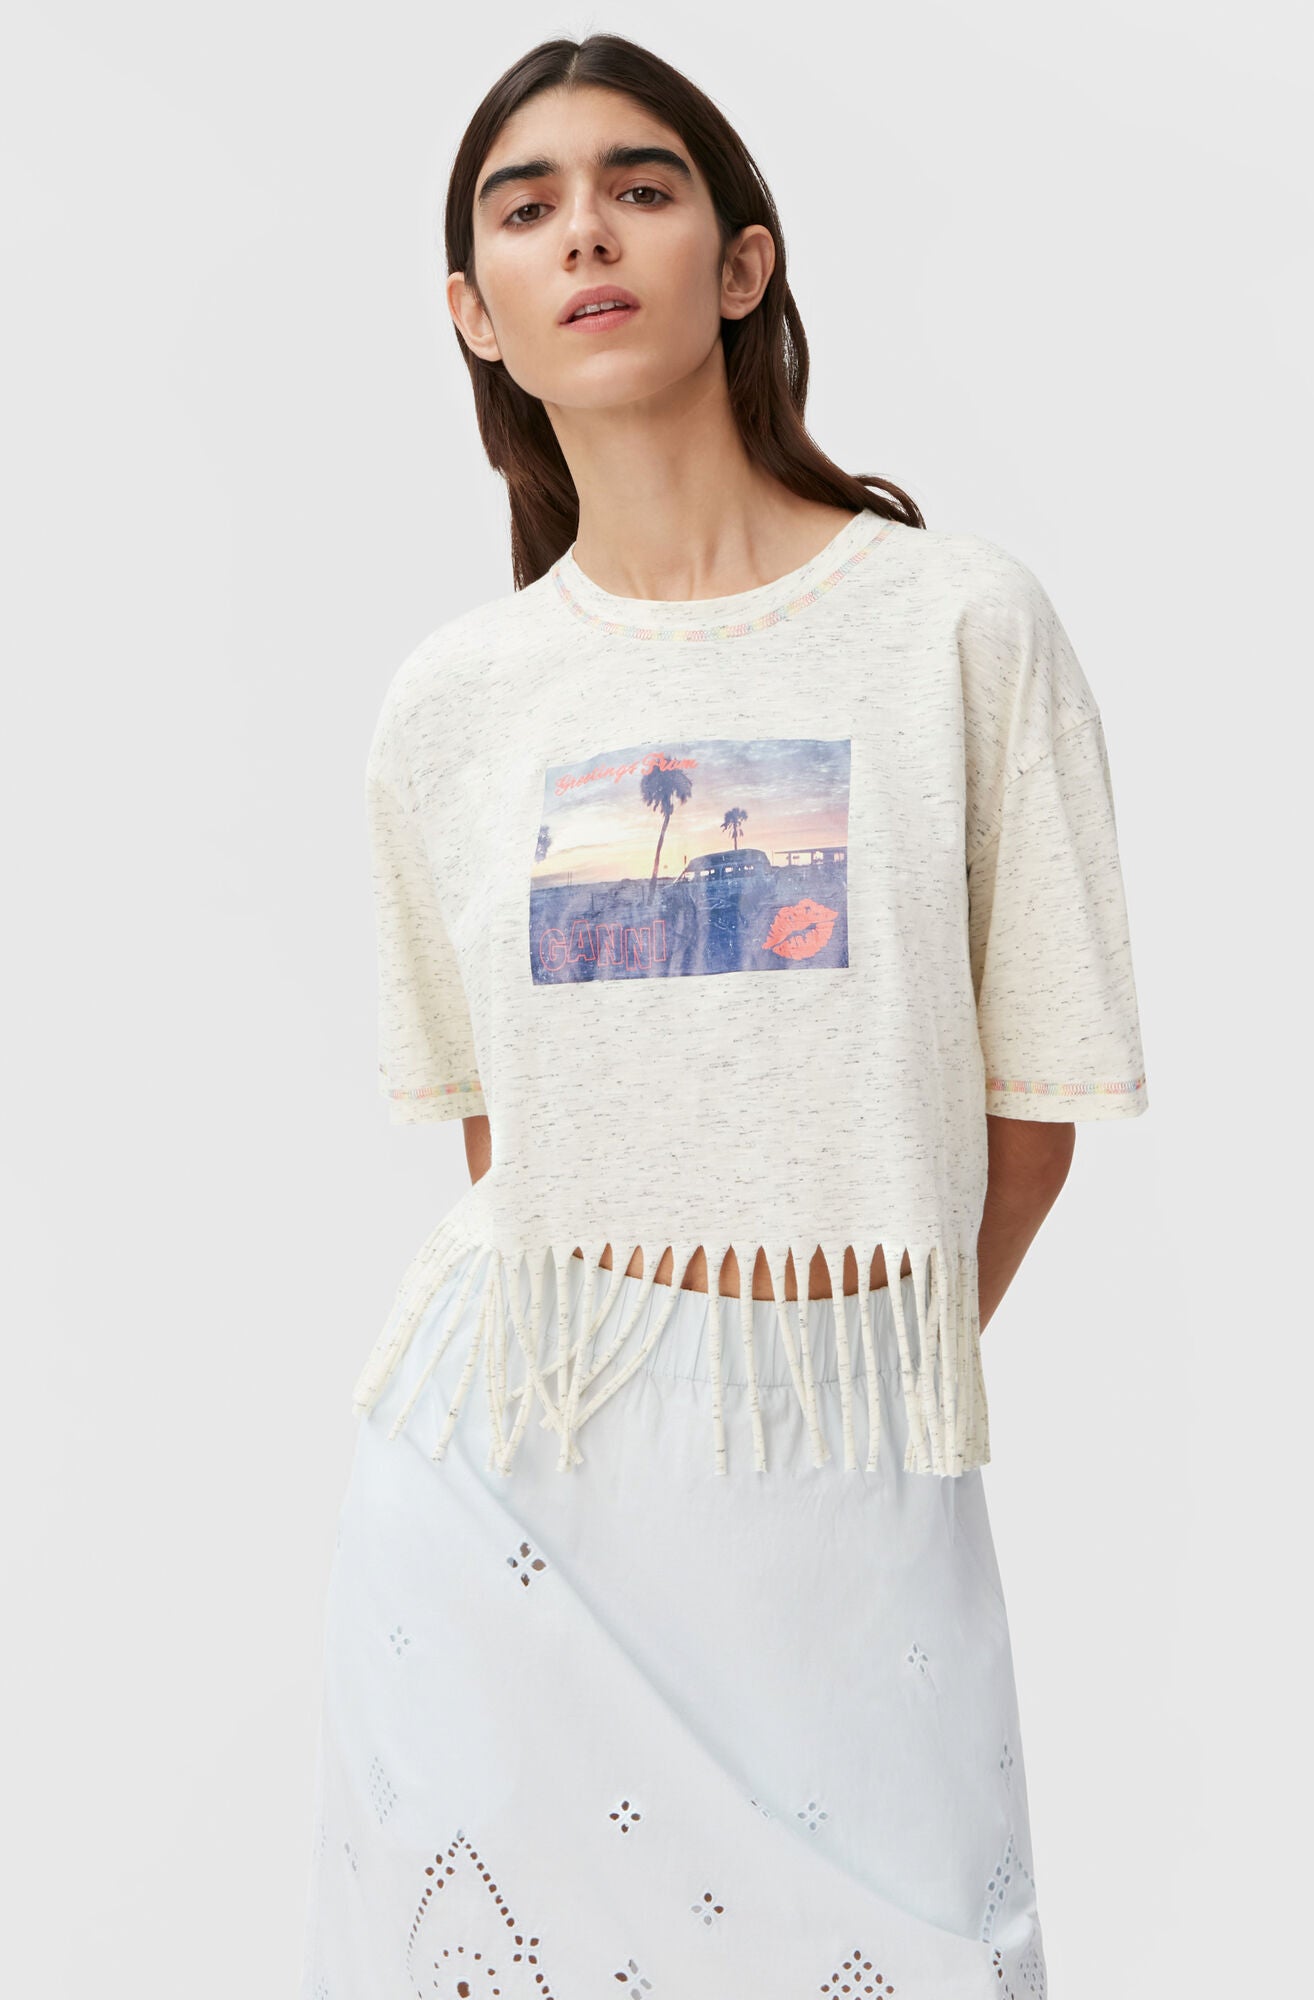 Cropped Fringe Graphic Tee